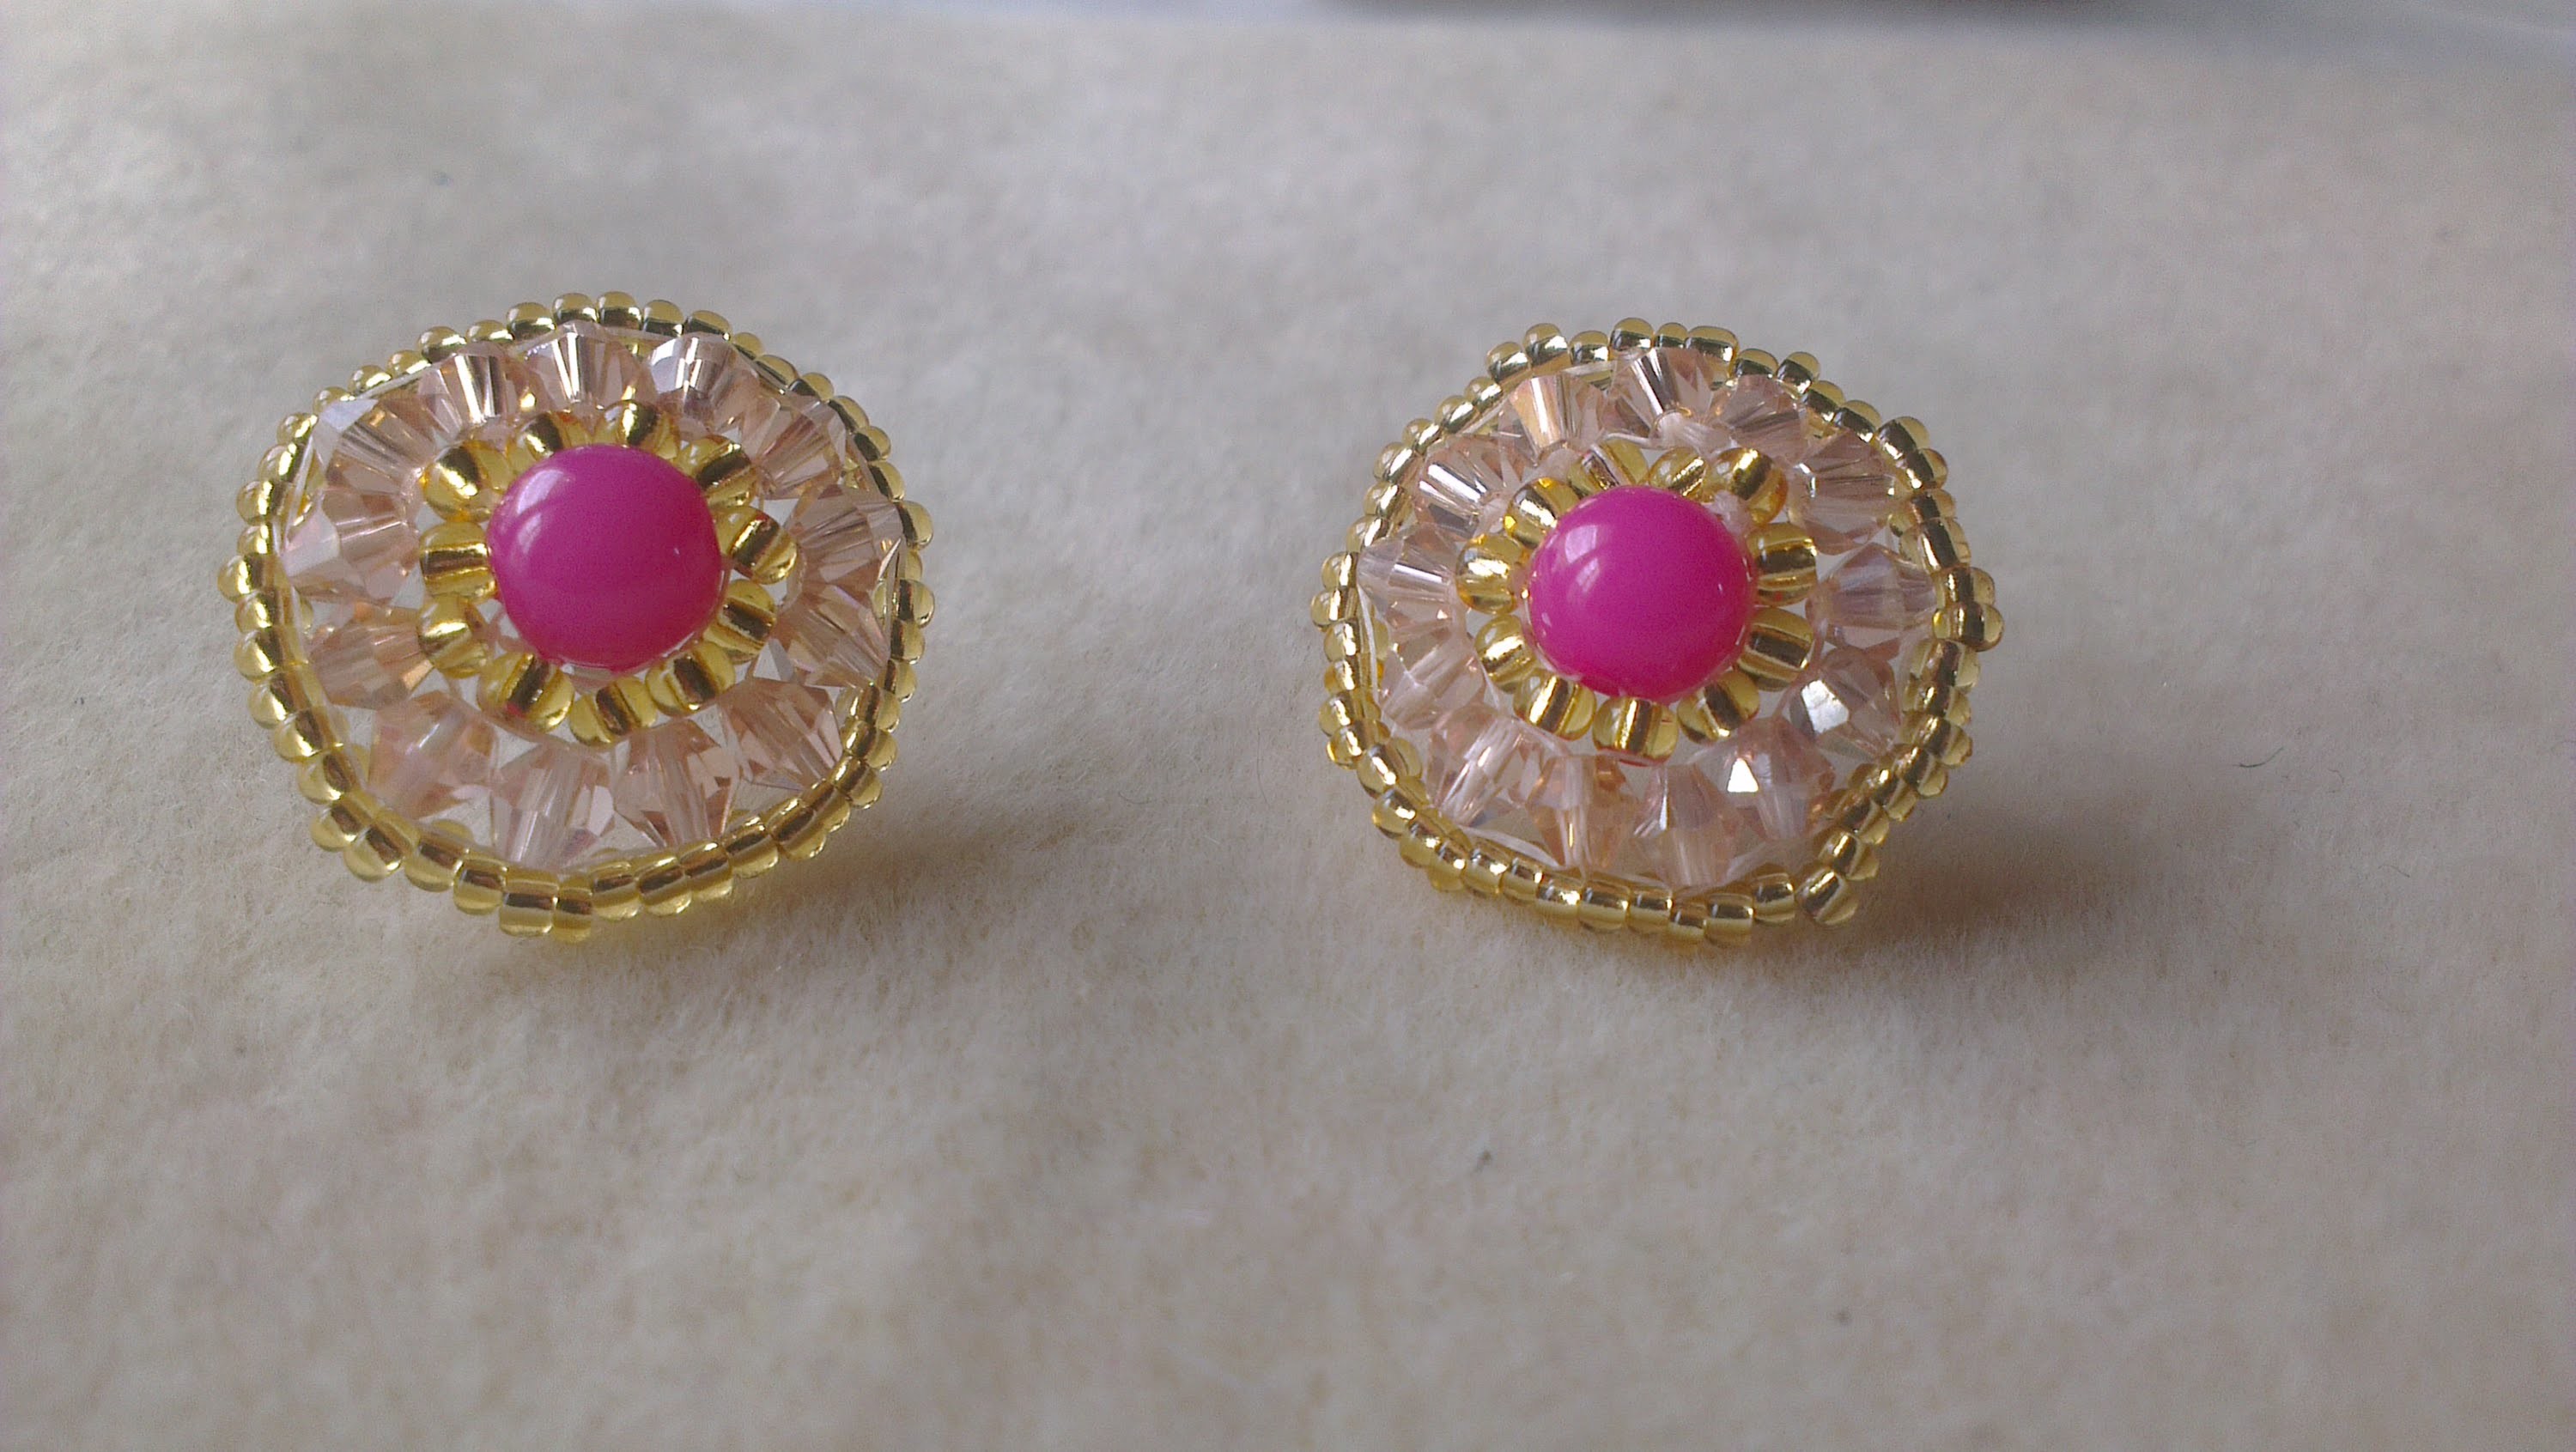 PENDIENTES ROSA Y ORO - PINK AND GOLD EARRINGS